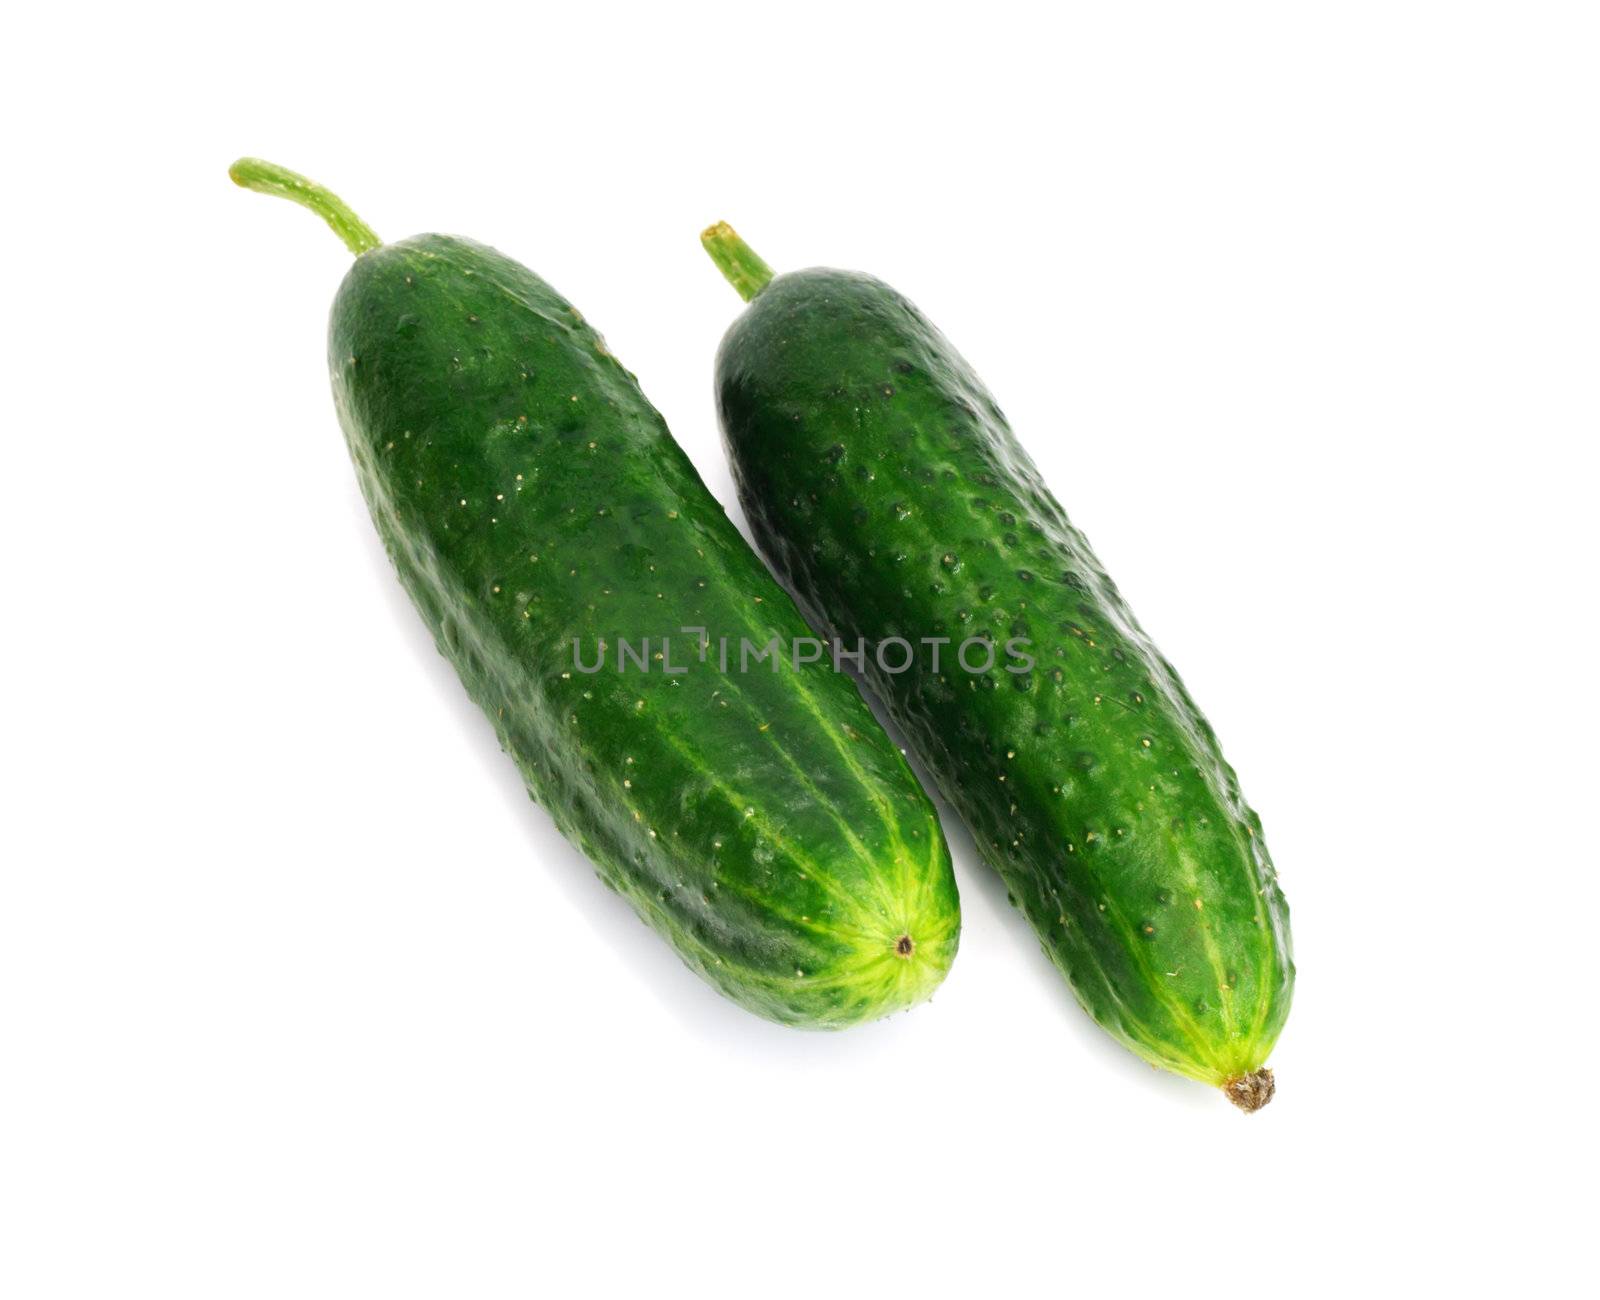 two cucumber on white background